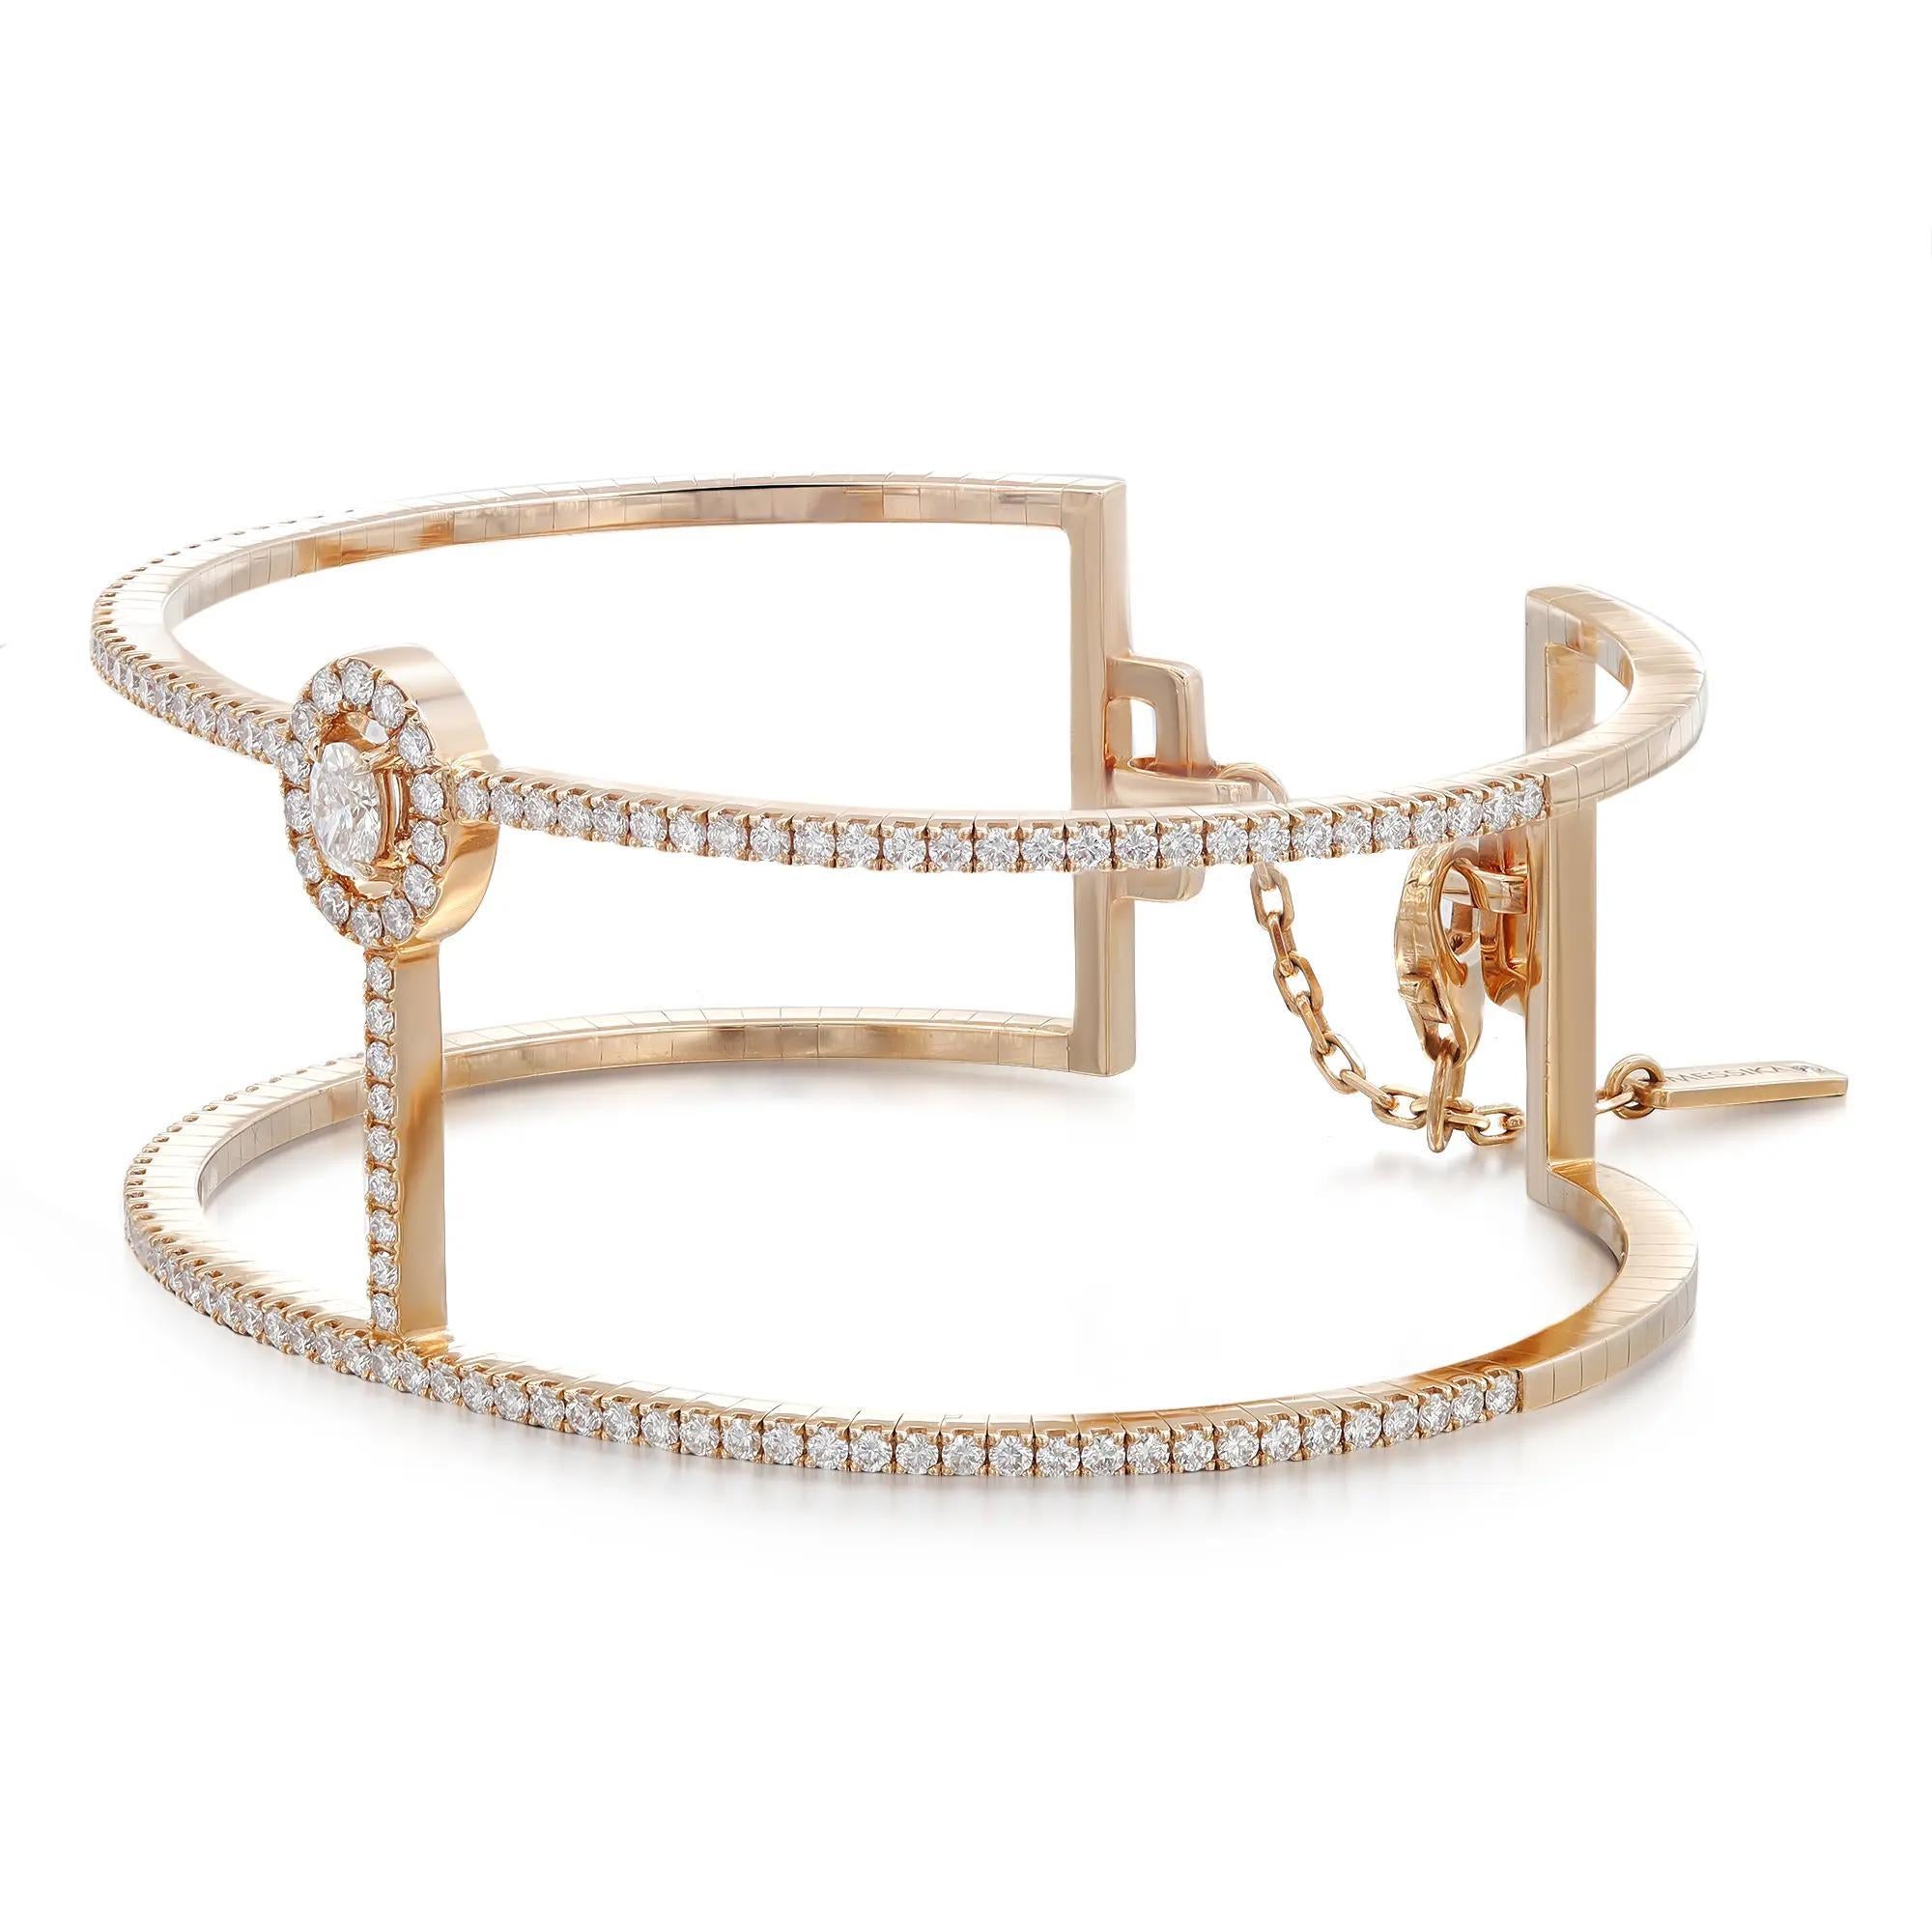 Walk with grace with this gorgeous Messika Manch Glam'Azone diamond 2 rows cuff bracelet. Crafted in lustrous 18K rose gold. It features center prong set oval cut diamond accented with round brilliant cut diamonds halfway through the bracelet. Total